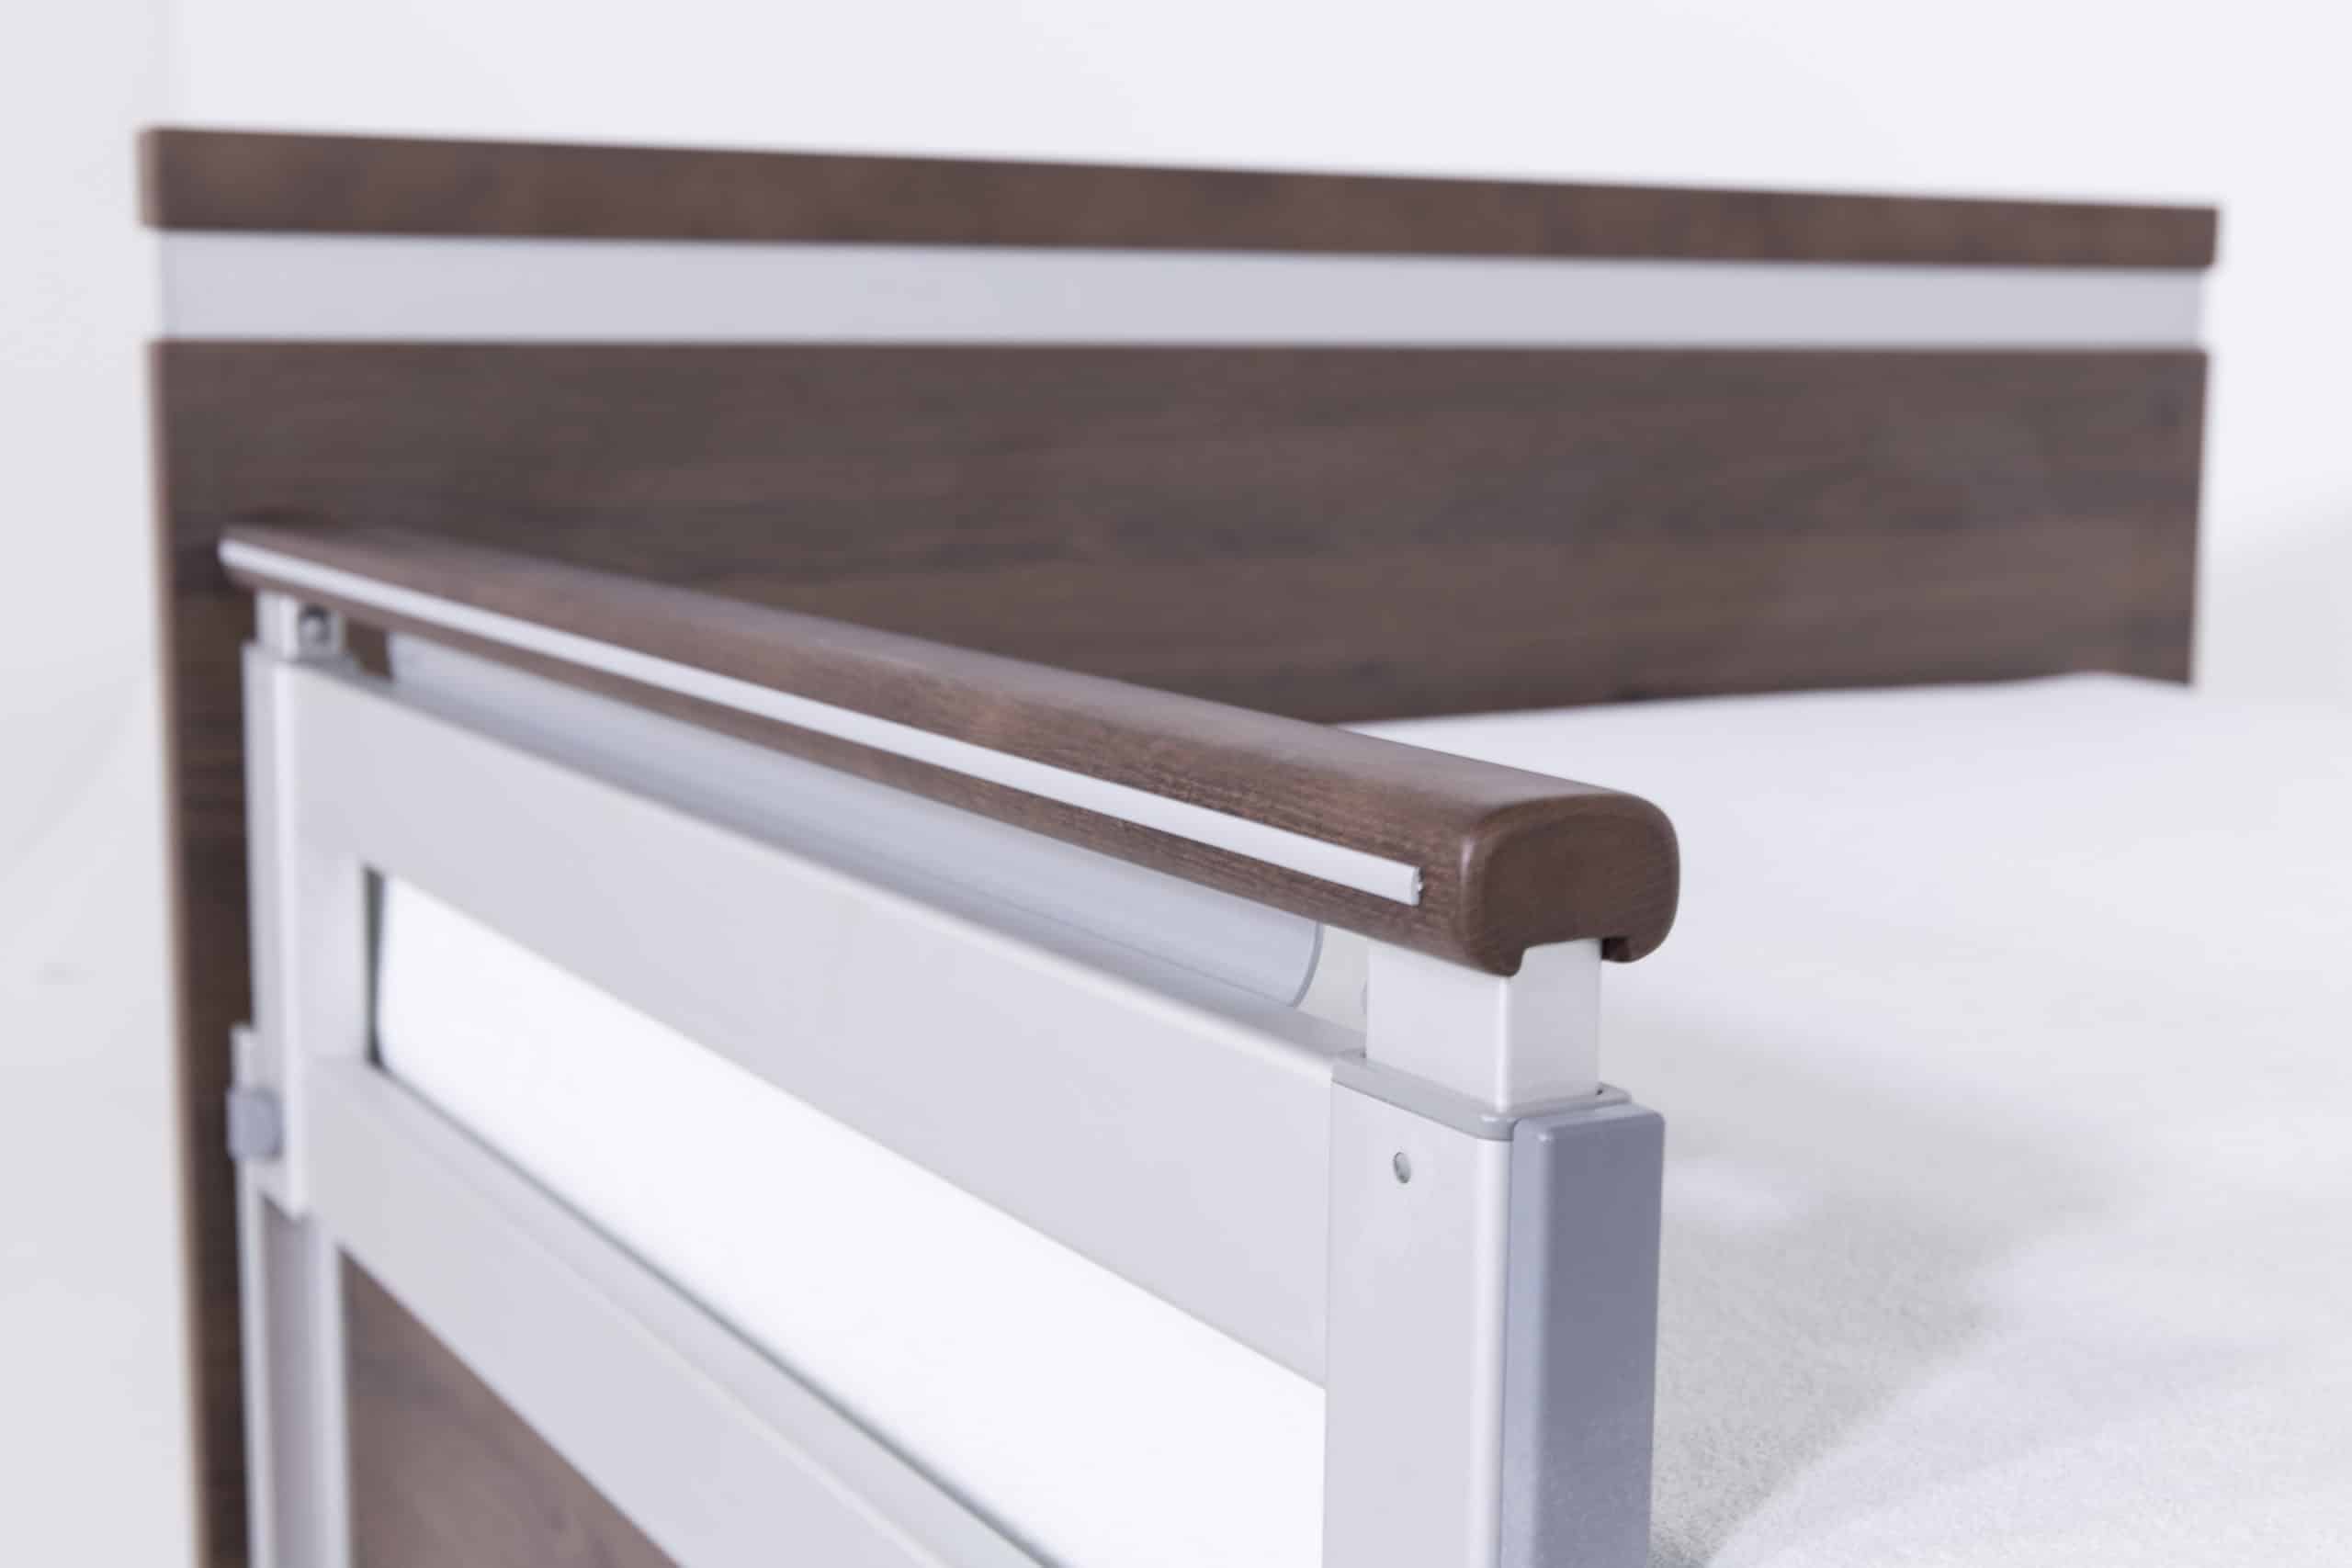 a close up of a bed with a wooden headboard.